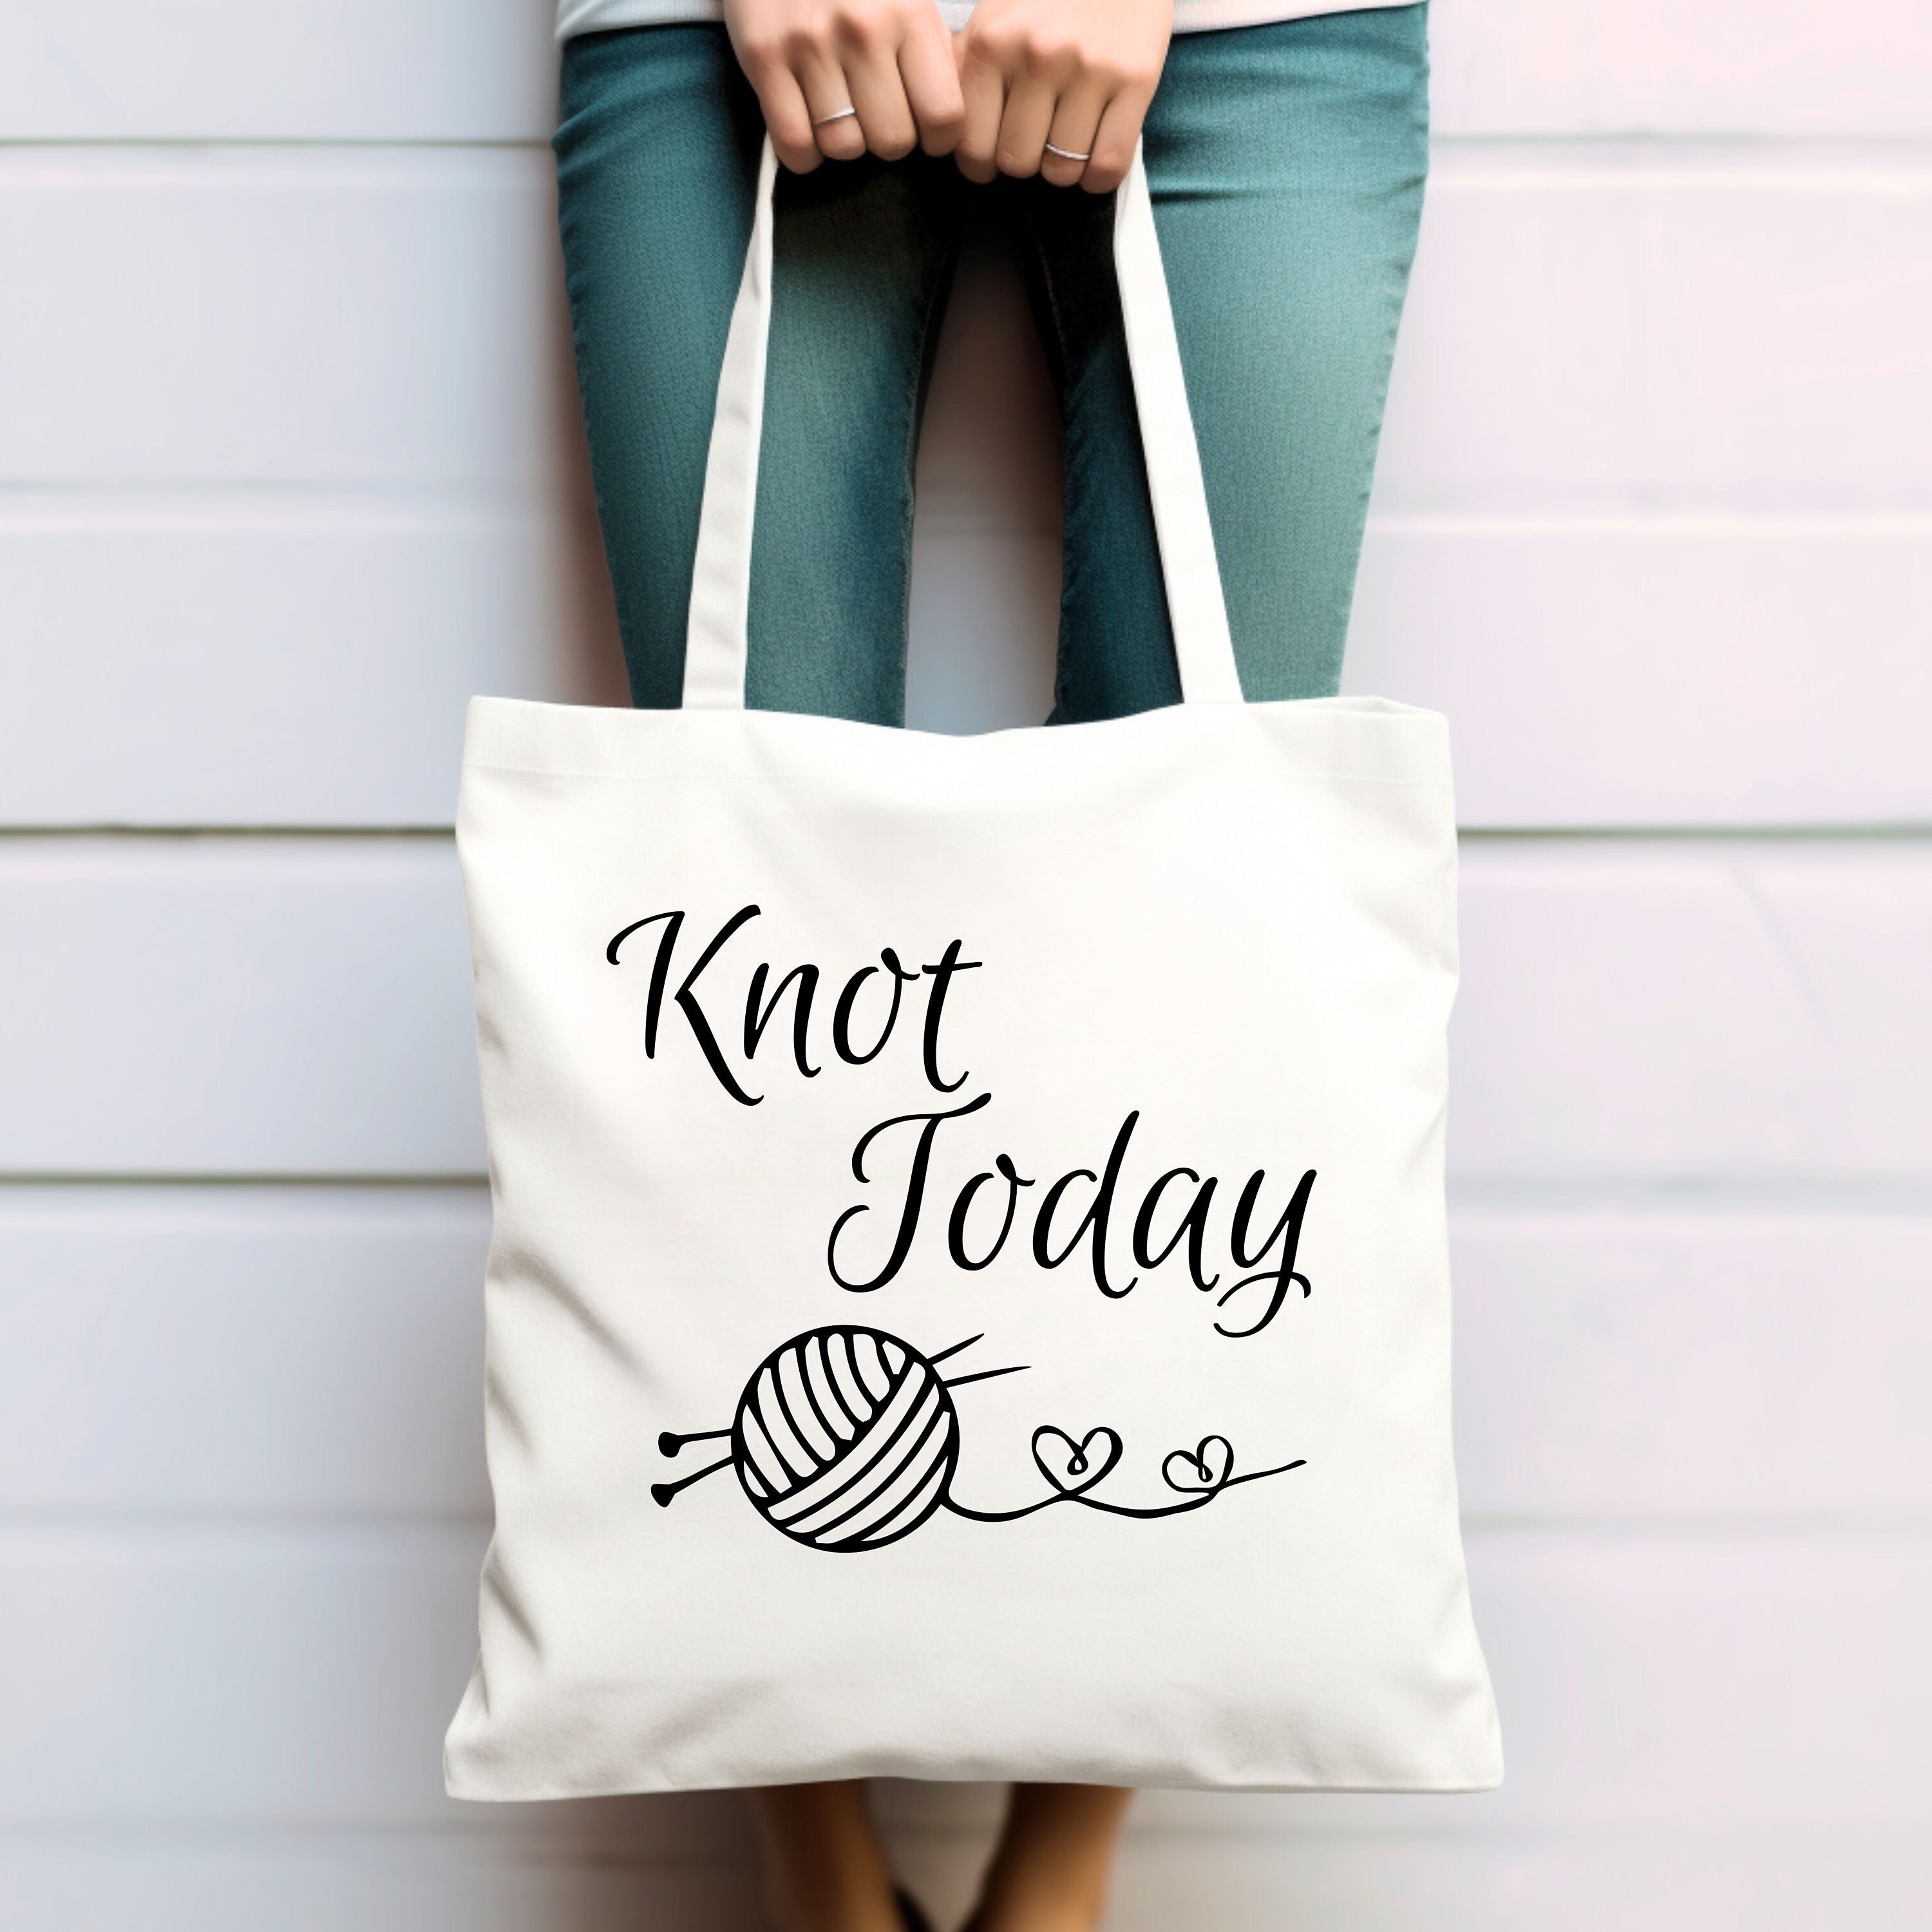 The Best Knitting Bag (Reviews) in 2023 + Buying Guide